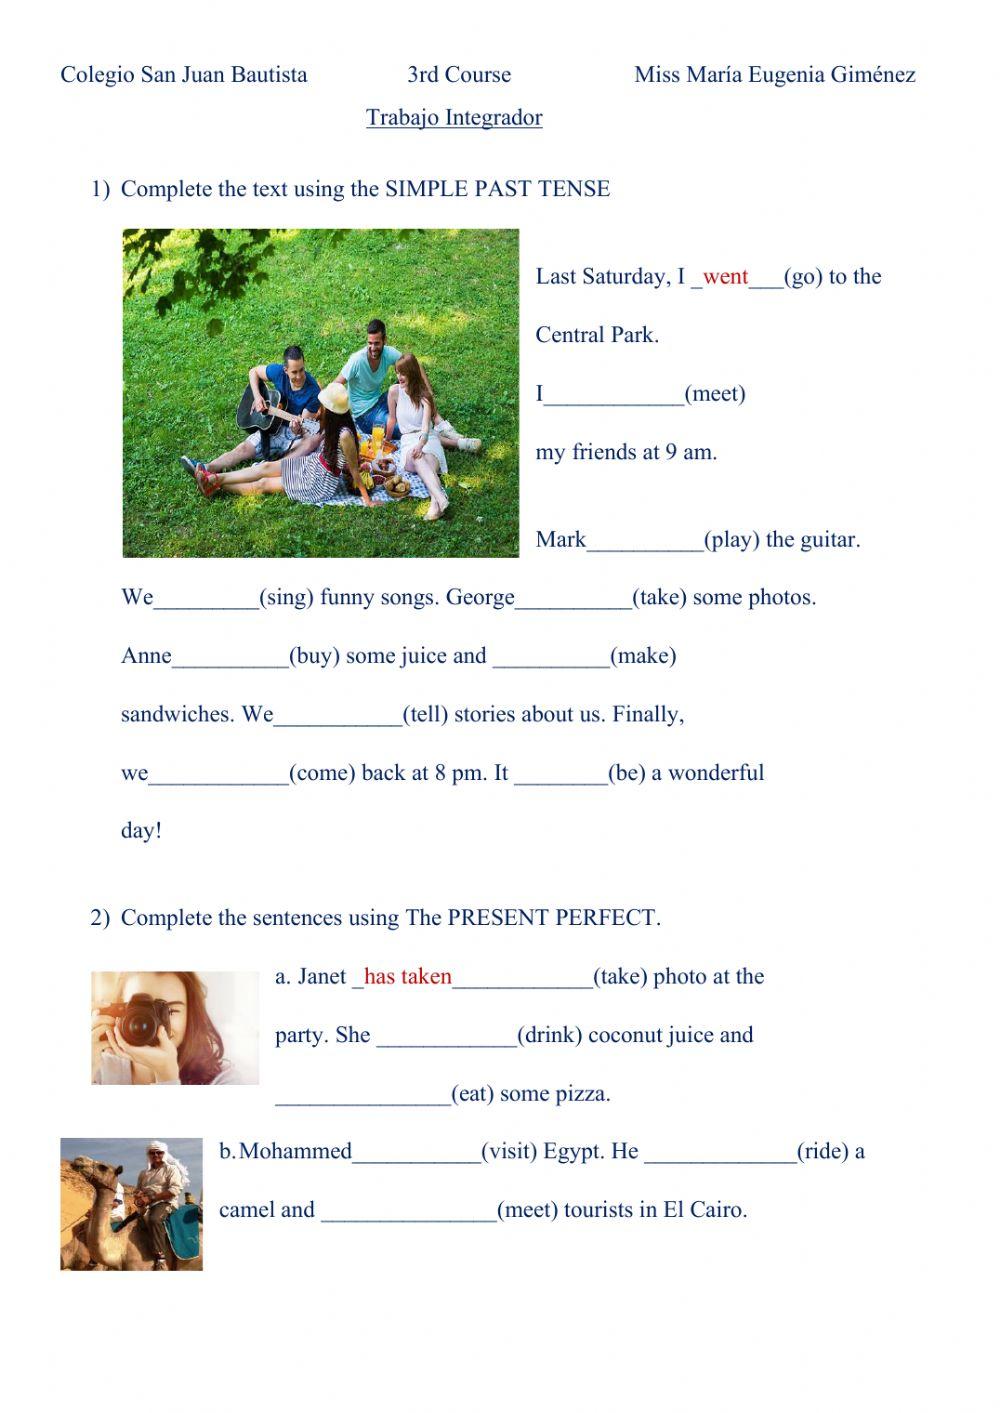 PRESENT PERFECT, SIMPLE PAST AND SIMPLE PRESENT 3ER COURSE